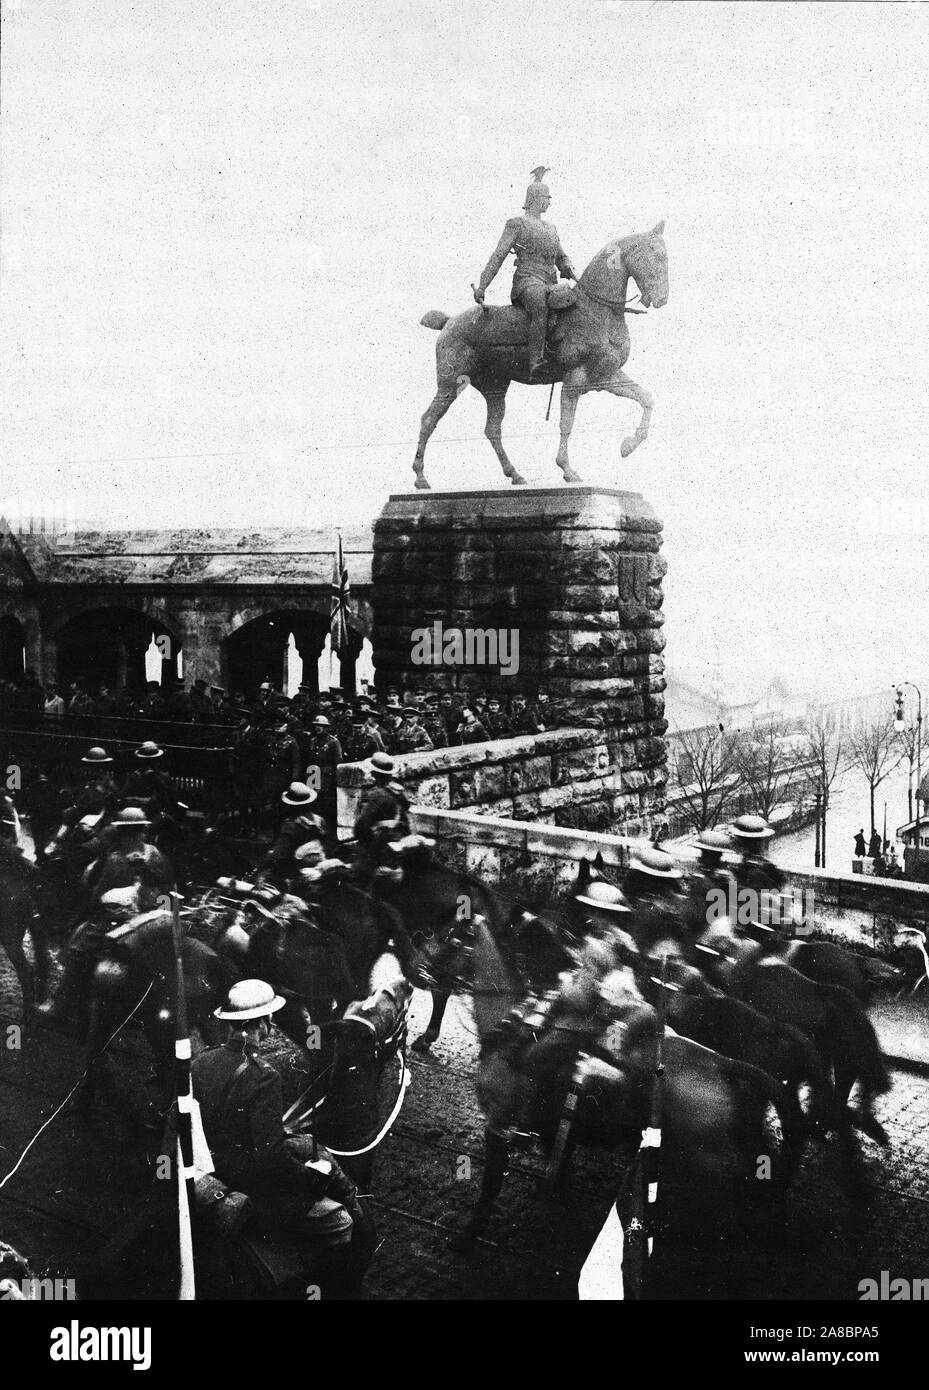 1919 - Kaiser watches British Army pass into Cologne. General Plumer, commander of the 2nd British Army with staff alongside the statue of the Kaiser, reviewing his cavalry as they cross the Hohenzollern Bridge at Cologne Stock Photo